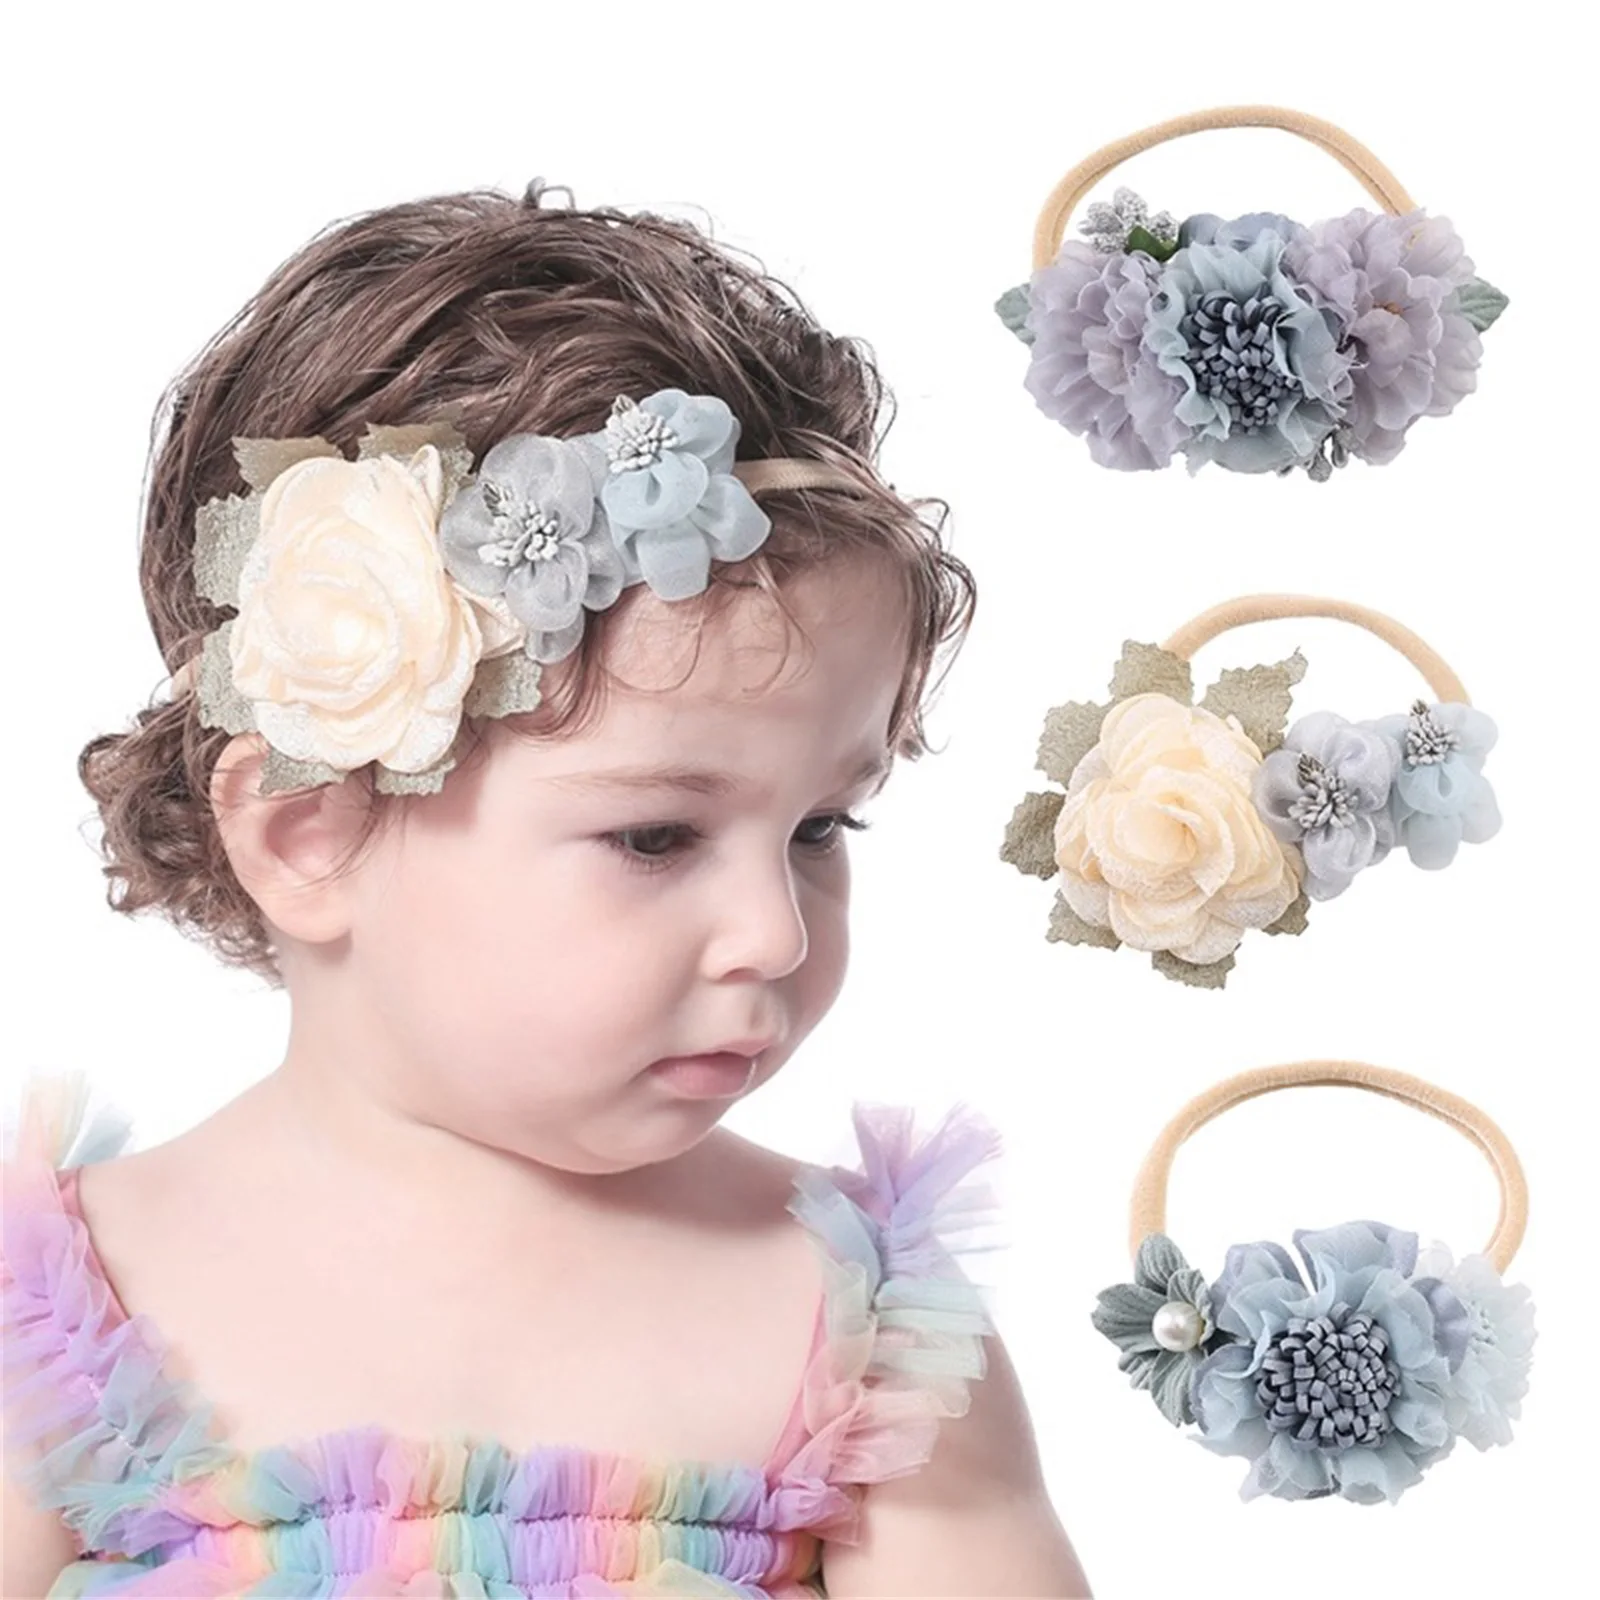 EWODOS Toddler Newborn Baby Girls Nylon Headbands Soft Infant Flower Hairbands Hair Bows Accessories for Home Party Wedding baby girl double layer bowknot headband toddler soft nylon elastic turban kids gray headwear princess party hair bands for baby